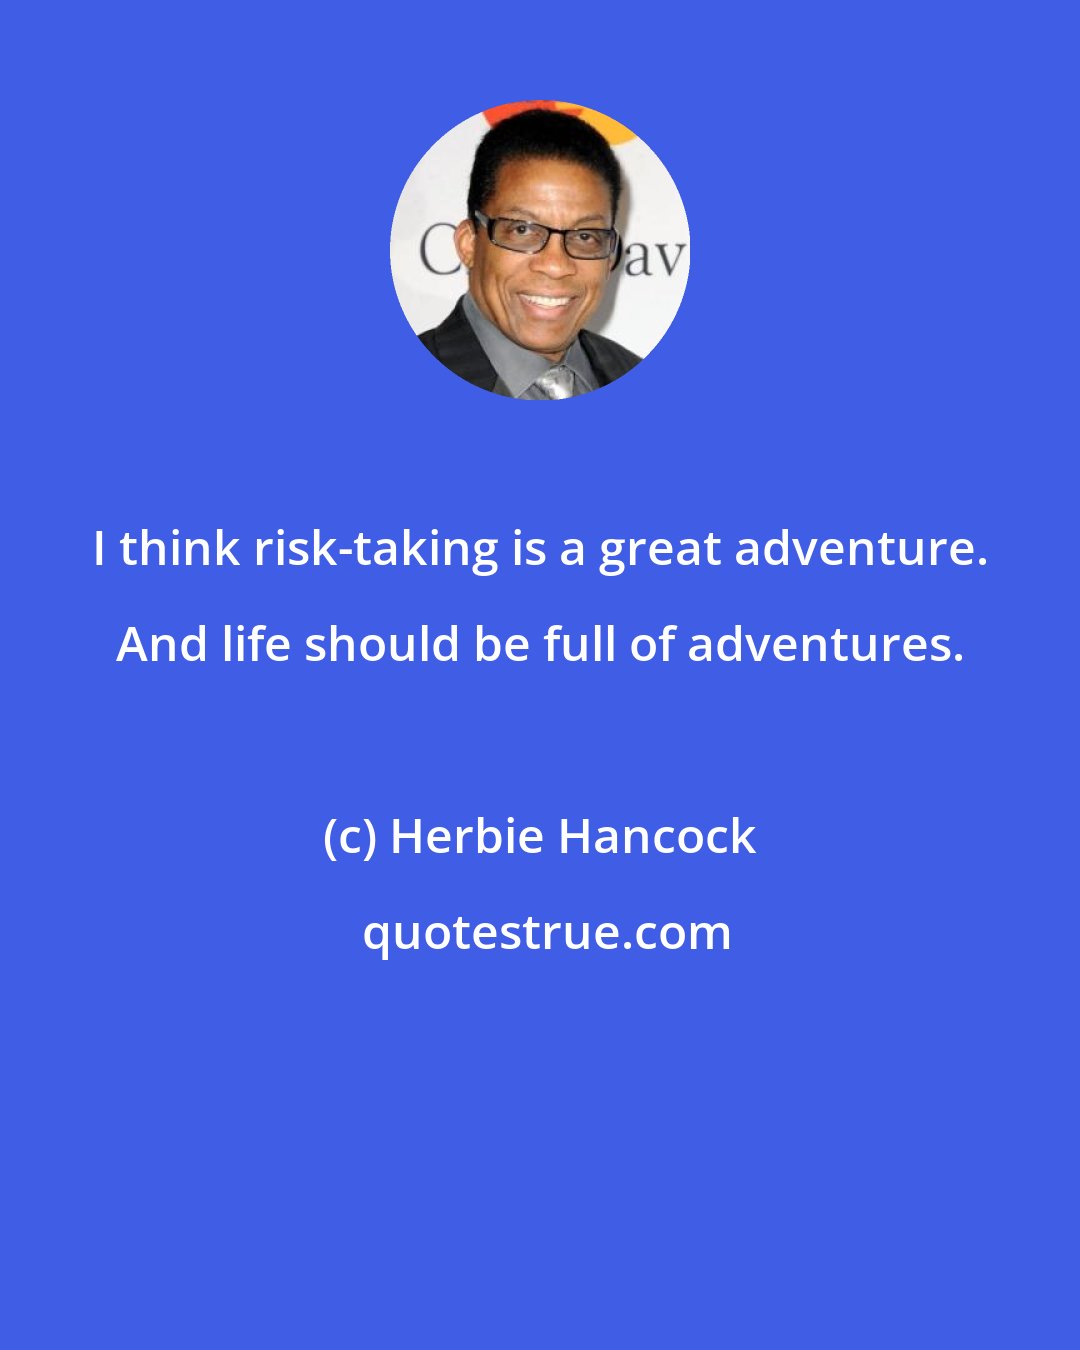 Herbie Hancock: I think risk-taking is a great adventure. And life should be full of adventures.